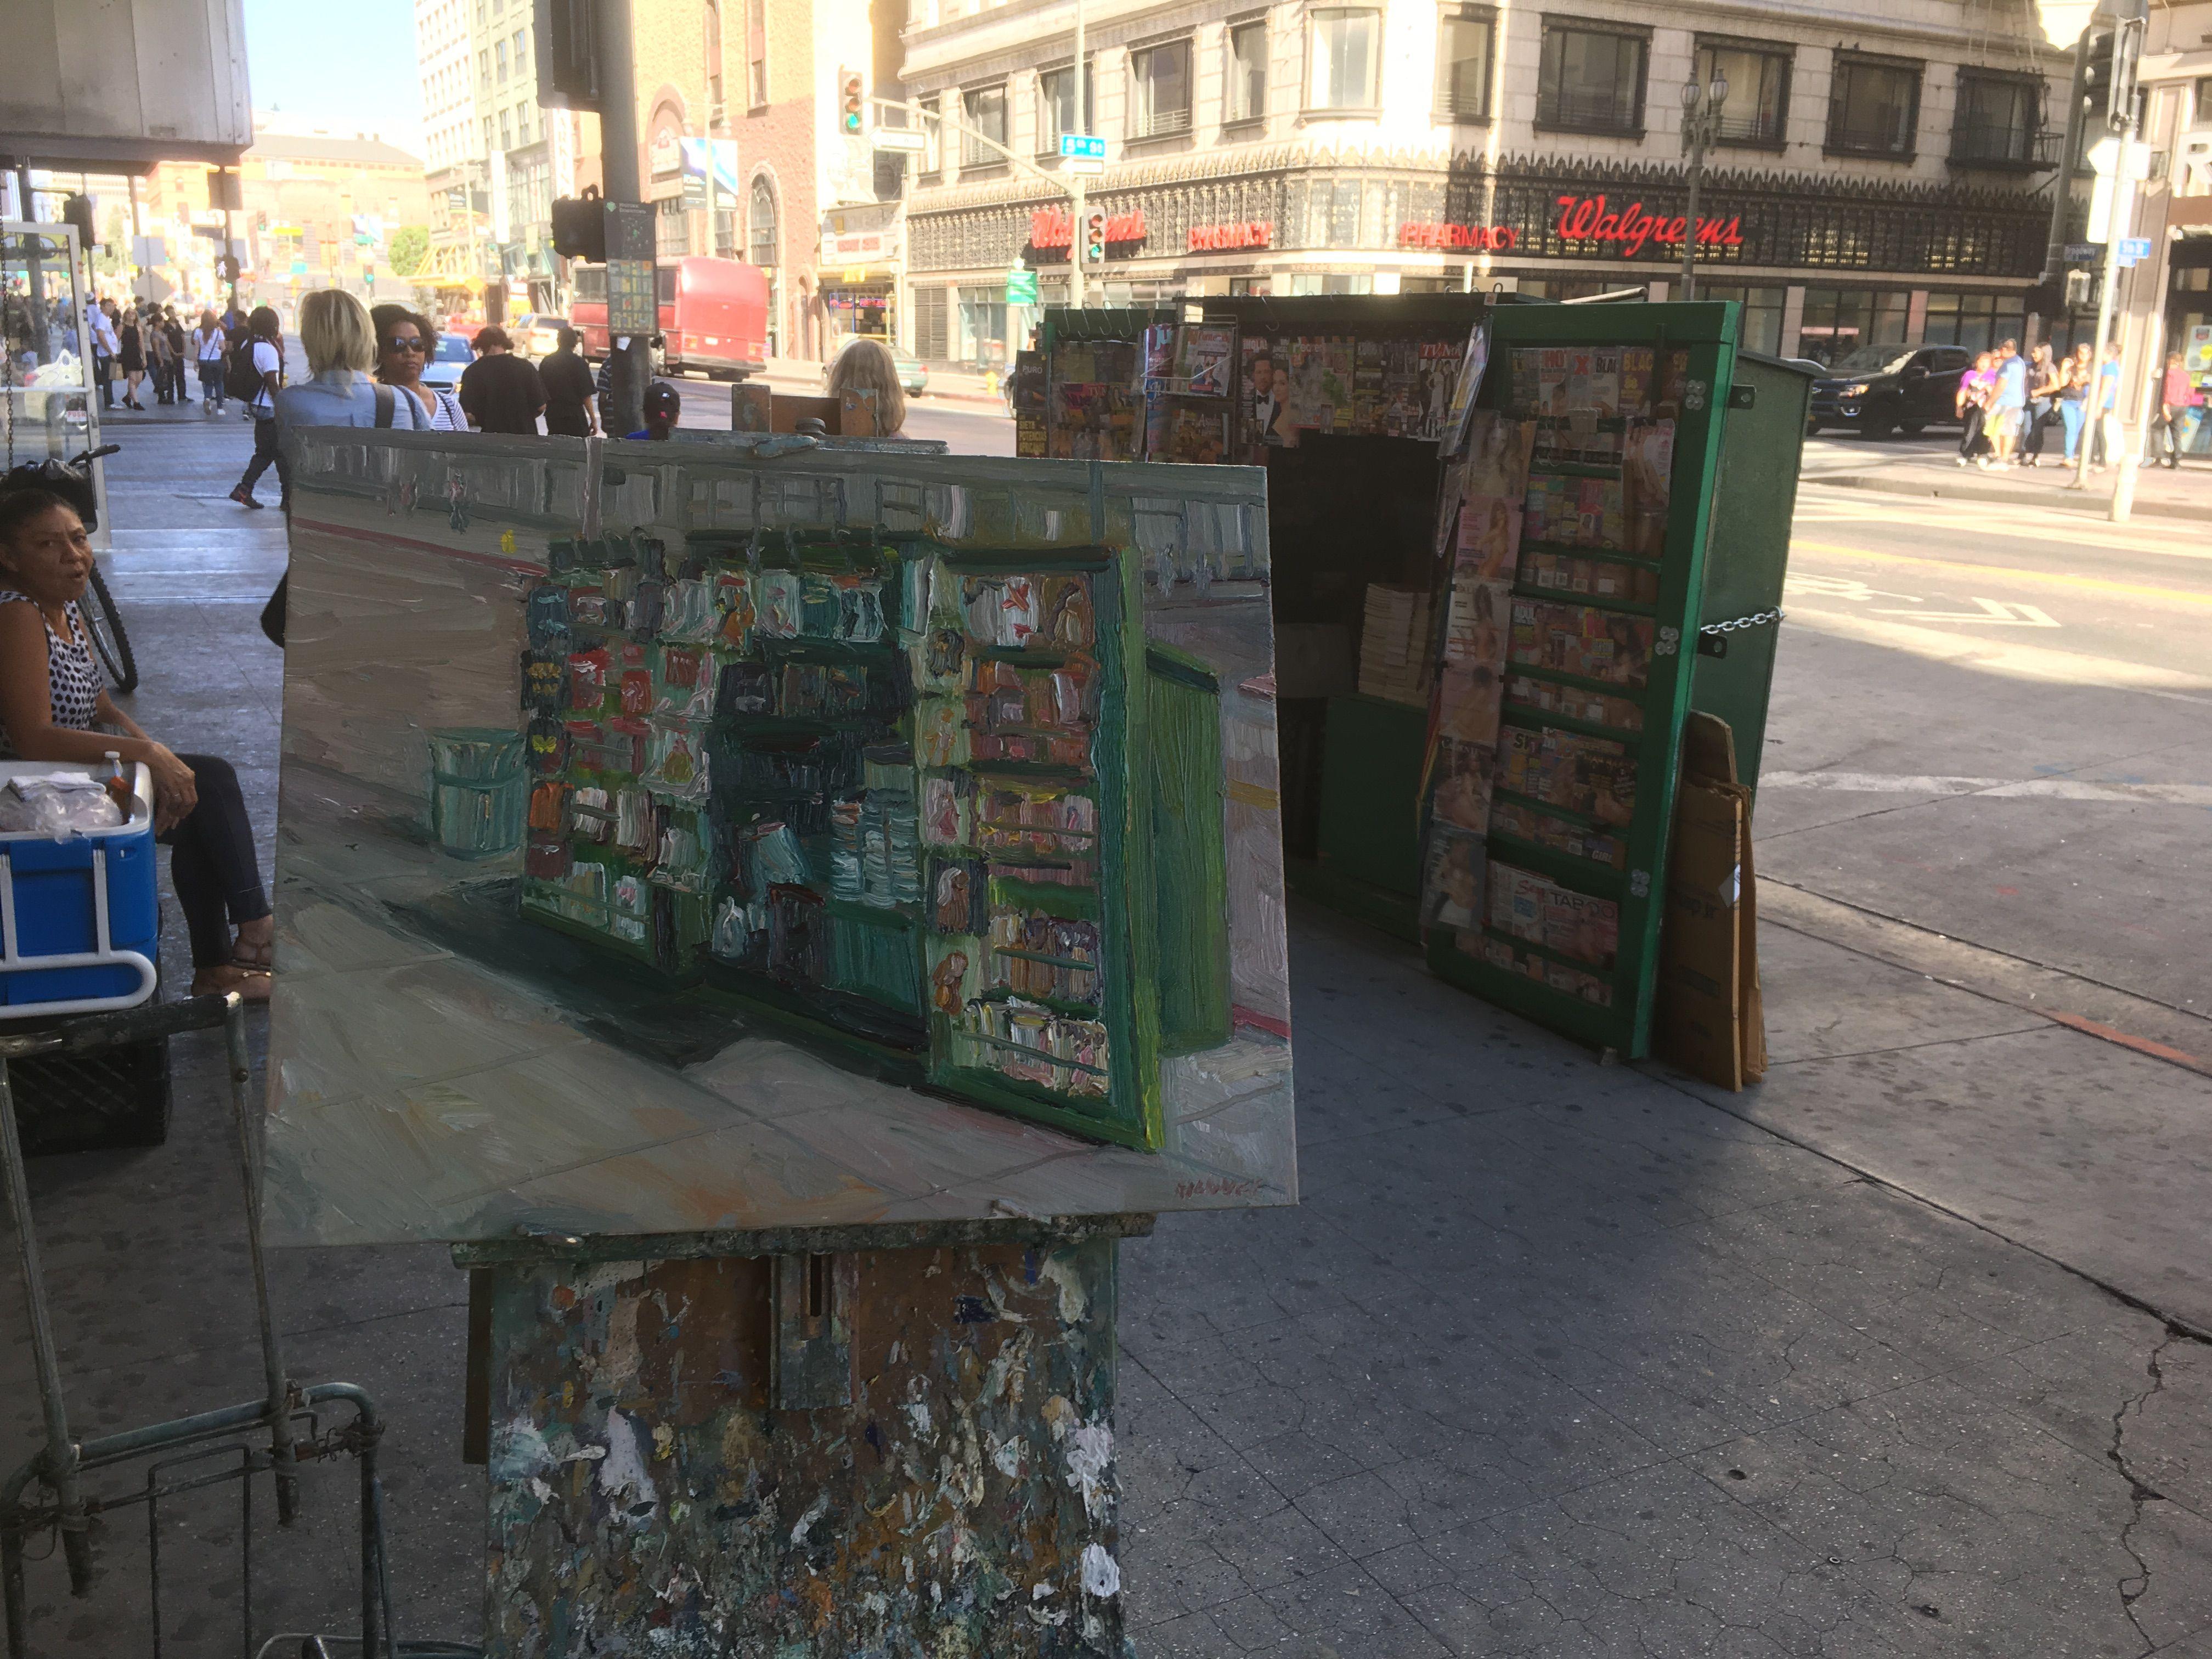 Plein air oil painting of a newsstand on Broadway Street in Downtown Los Angeles. I painted this during the Los Angeles Plein Air Festival 2016. I received 1st place in Oils.  :: Painting :: Impressionist :: This piece comes with an official